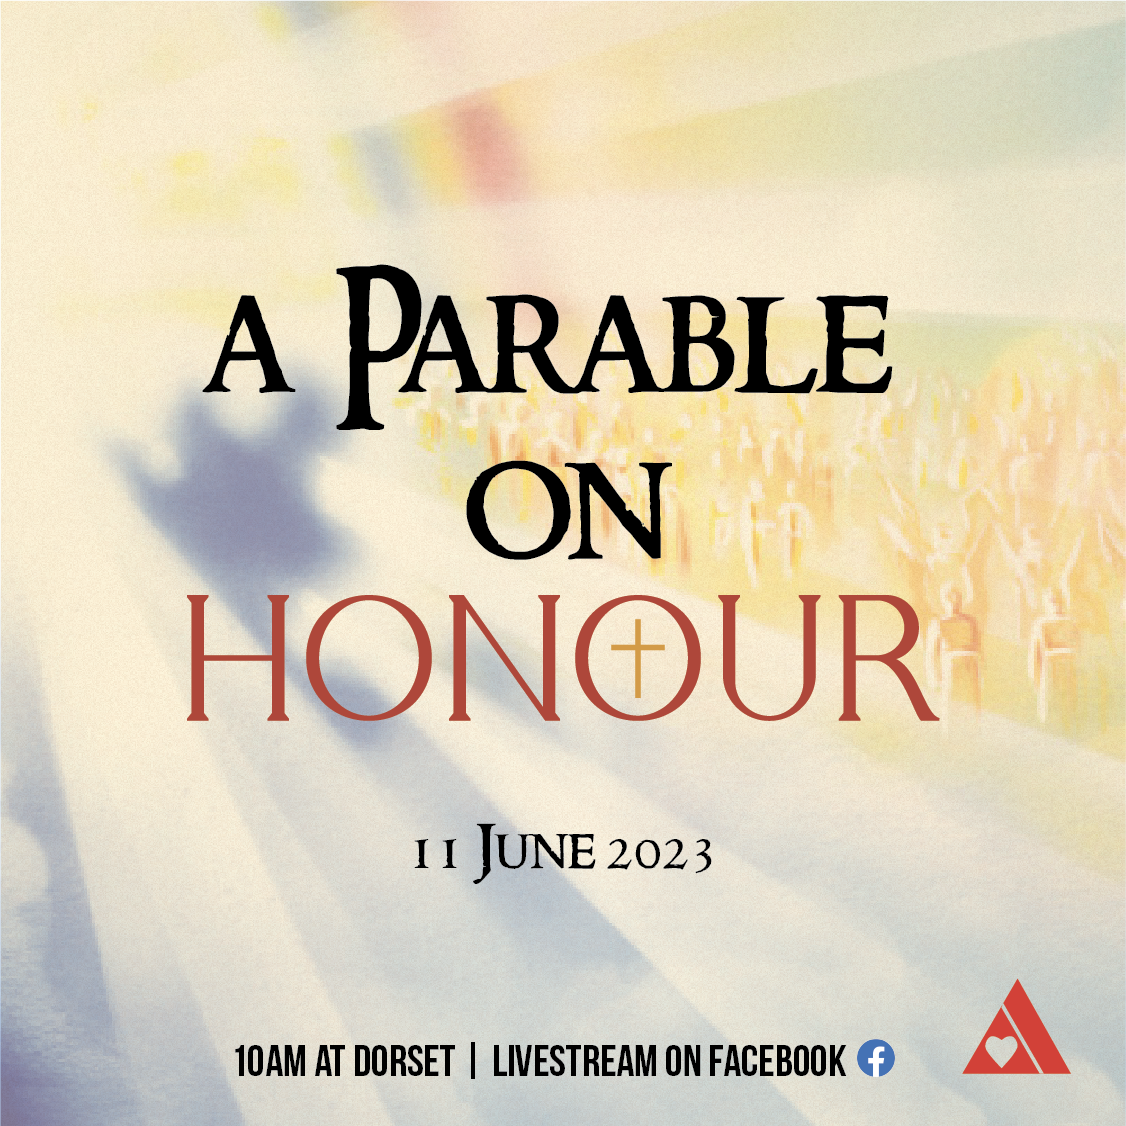 A Parable on Honour